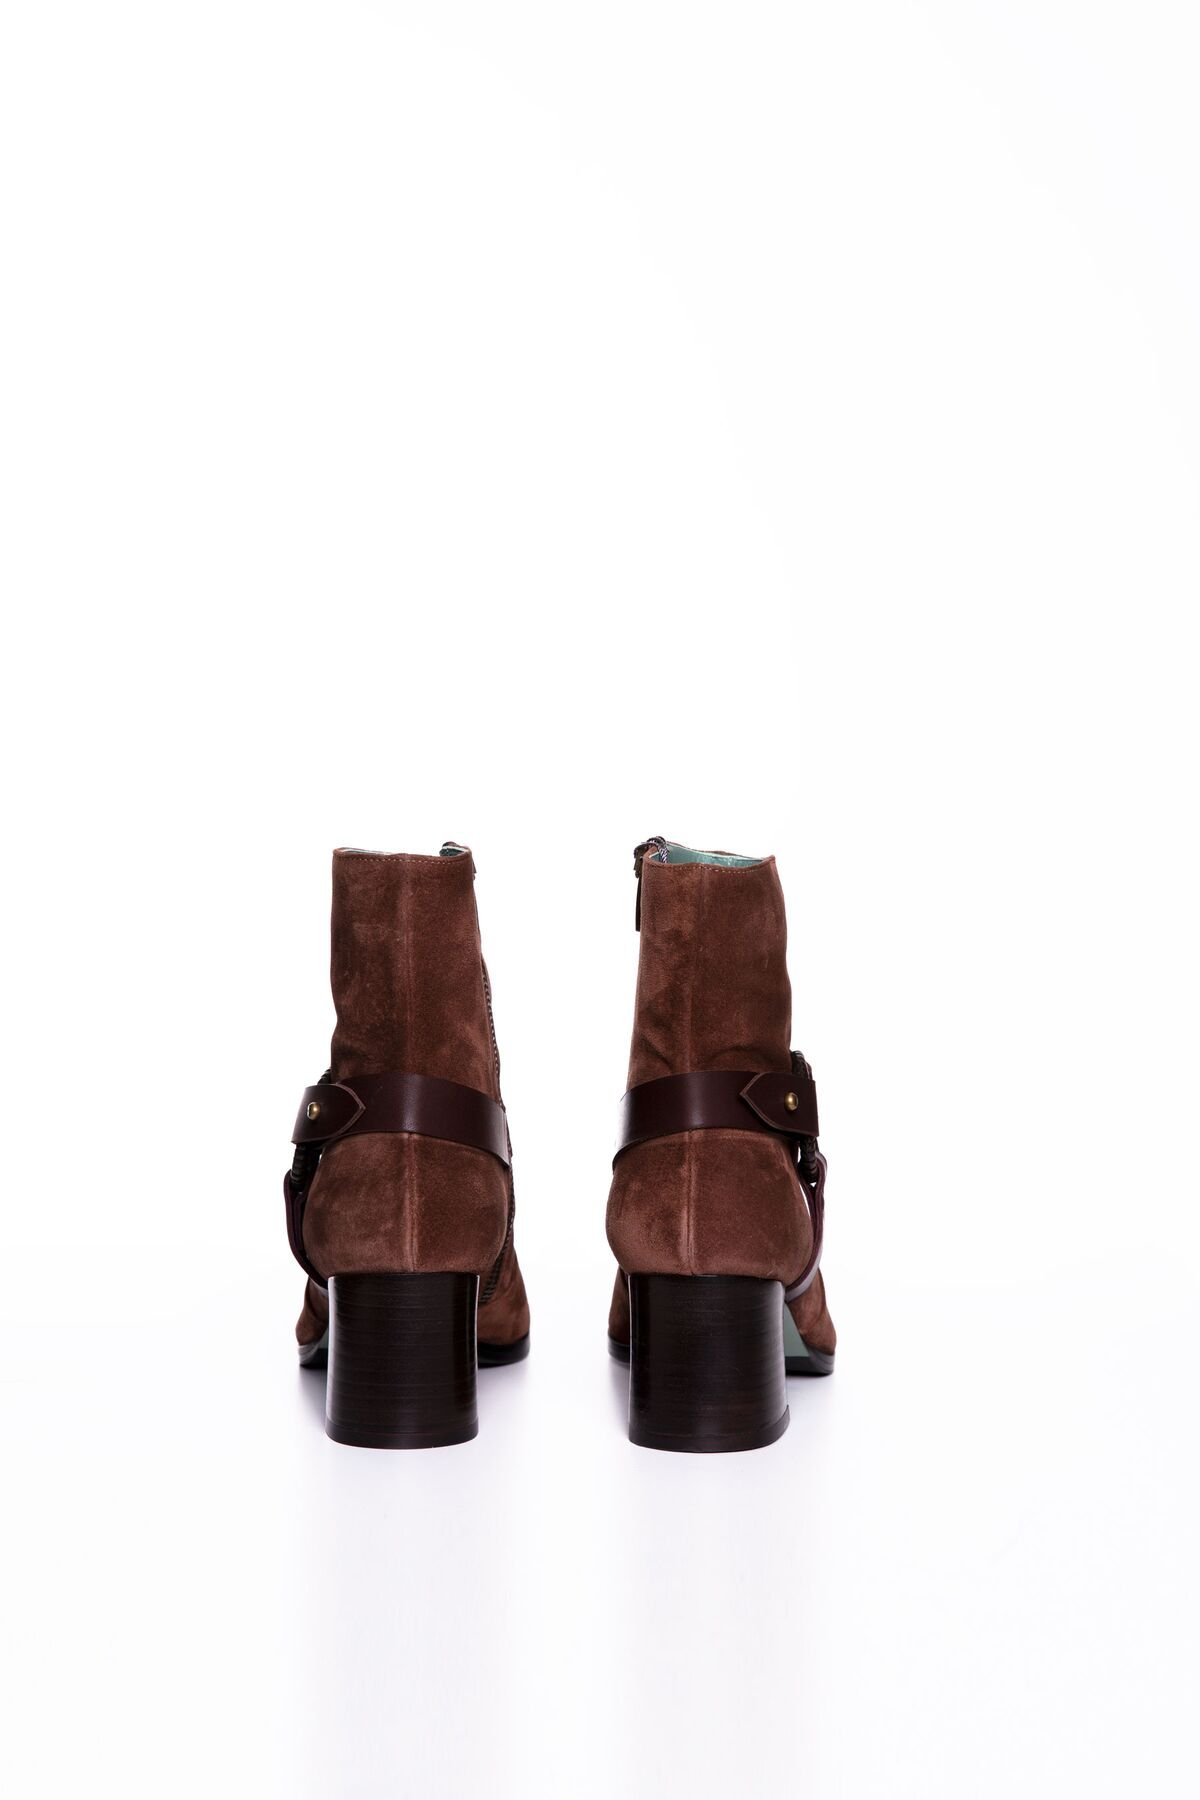 Buckle Detailed Brown Heeled Boots